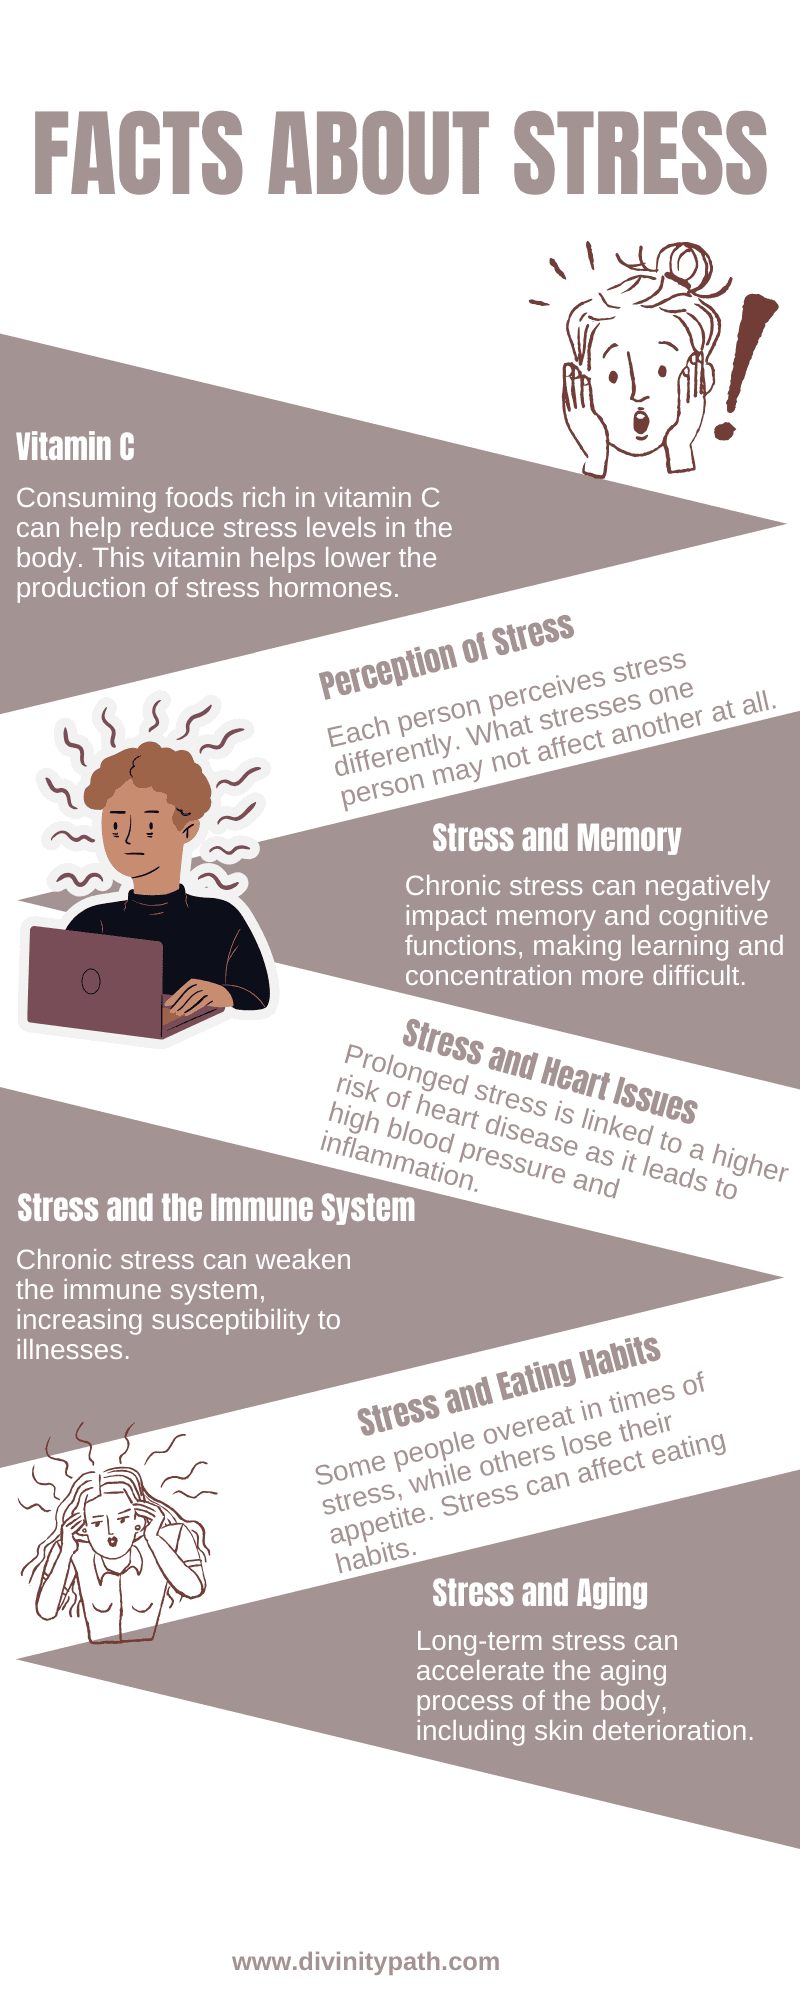 How To Develop Resistance To Stress And Maintain Your Health